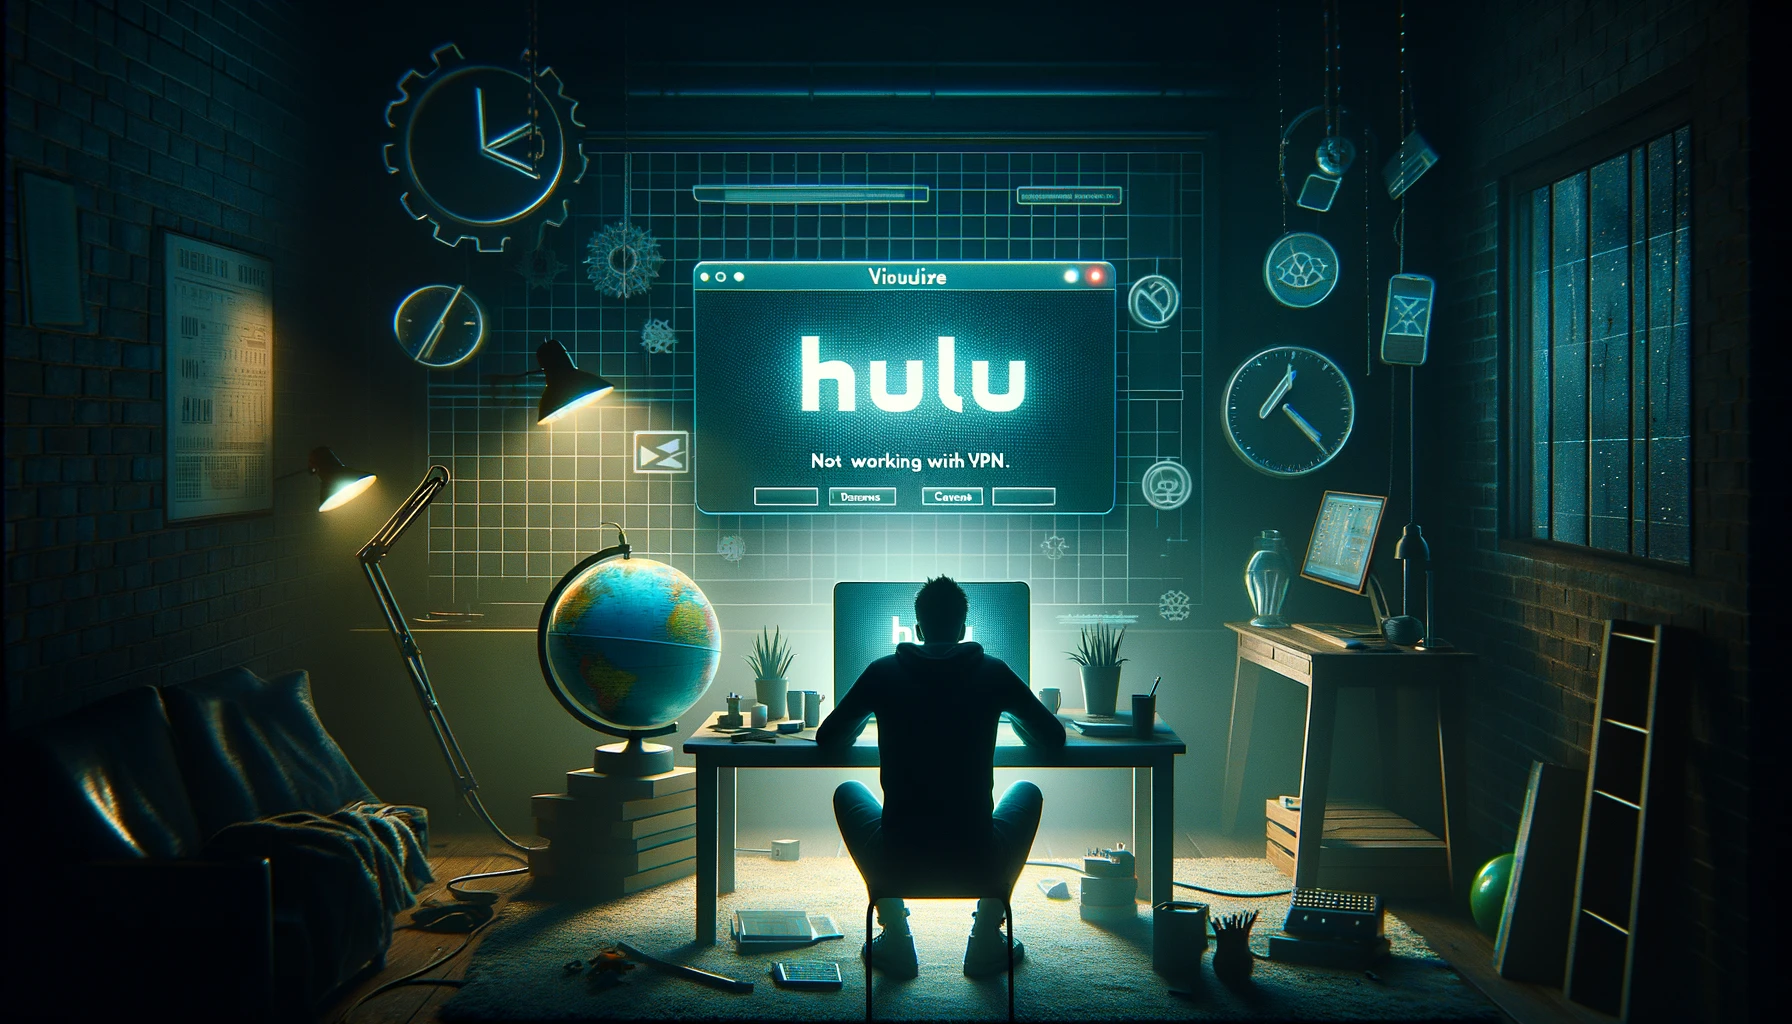 How to Fix Hulu Not Working with VPN